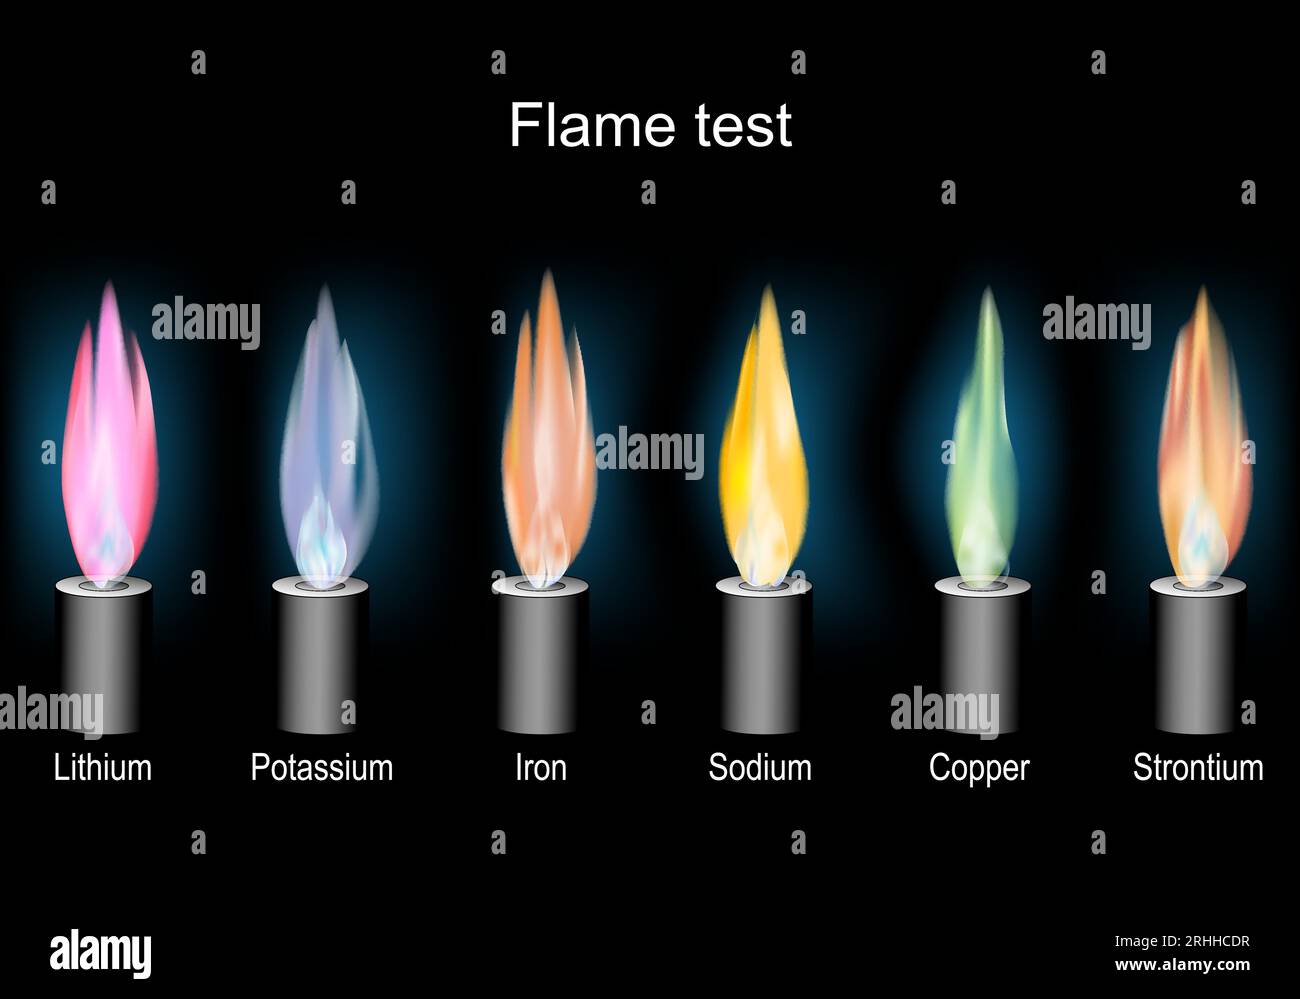 flame test. scientific experiment. Realistic vector illustration. Bunsen burners with color Flame on dark background. Stock Vector